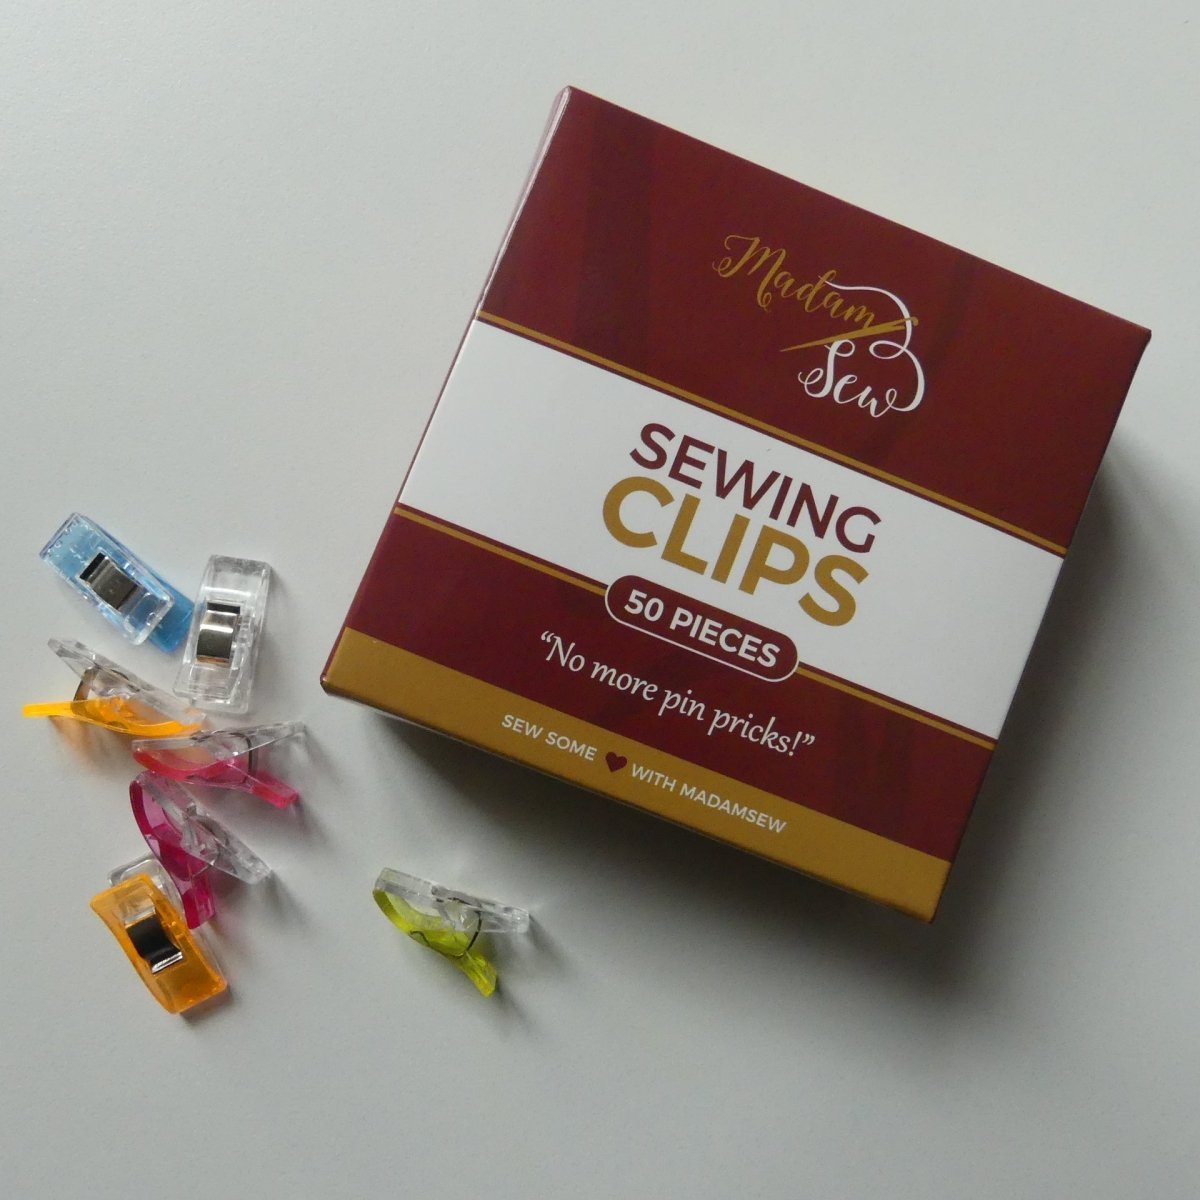 Sewing clips by Madam Sew next to a branded box